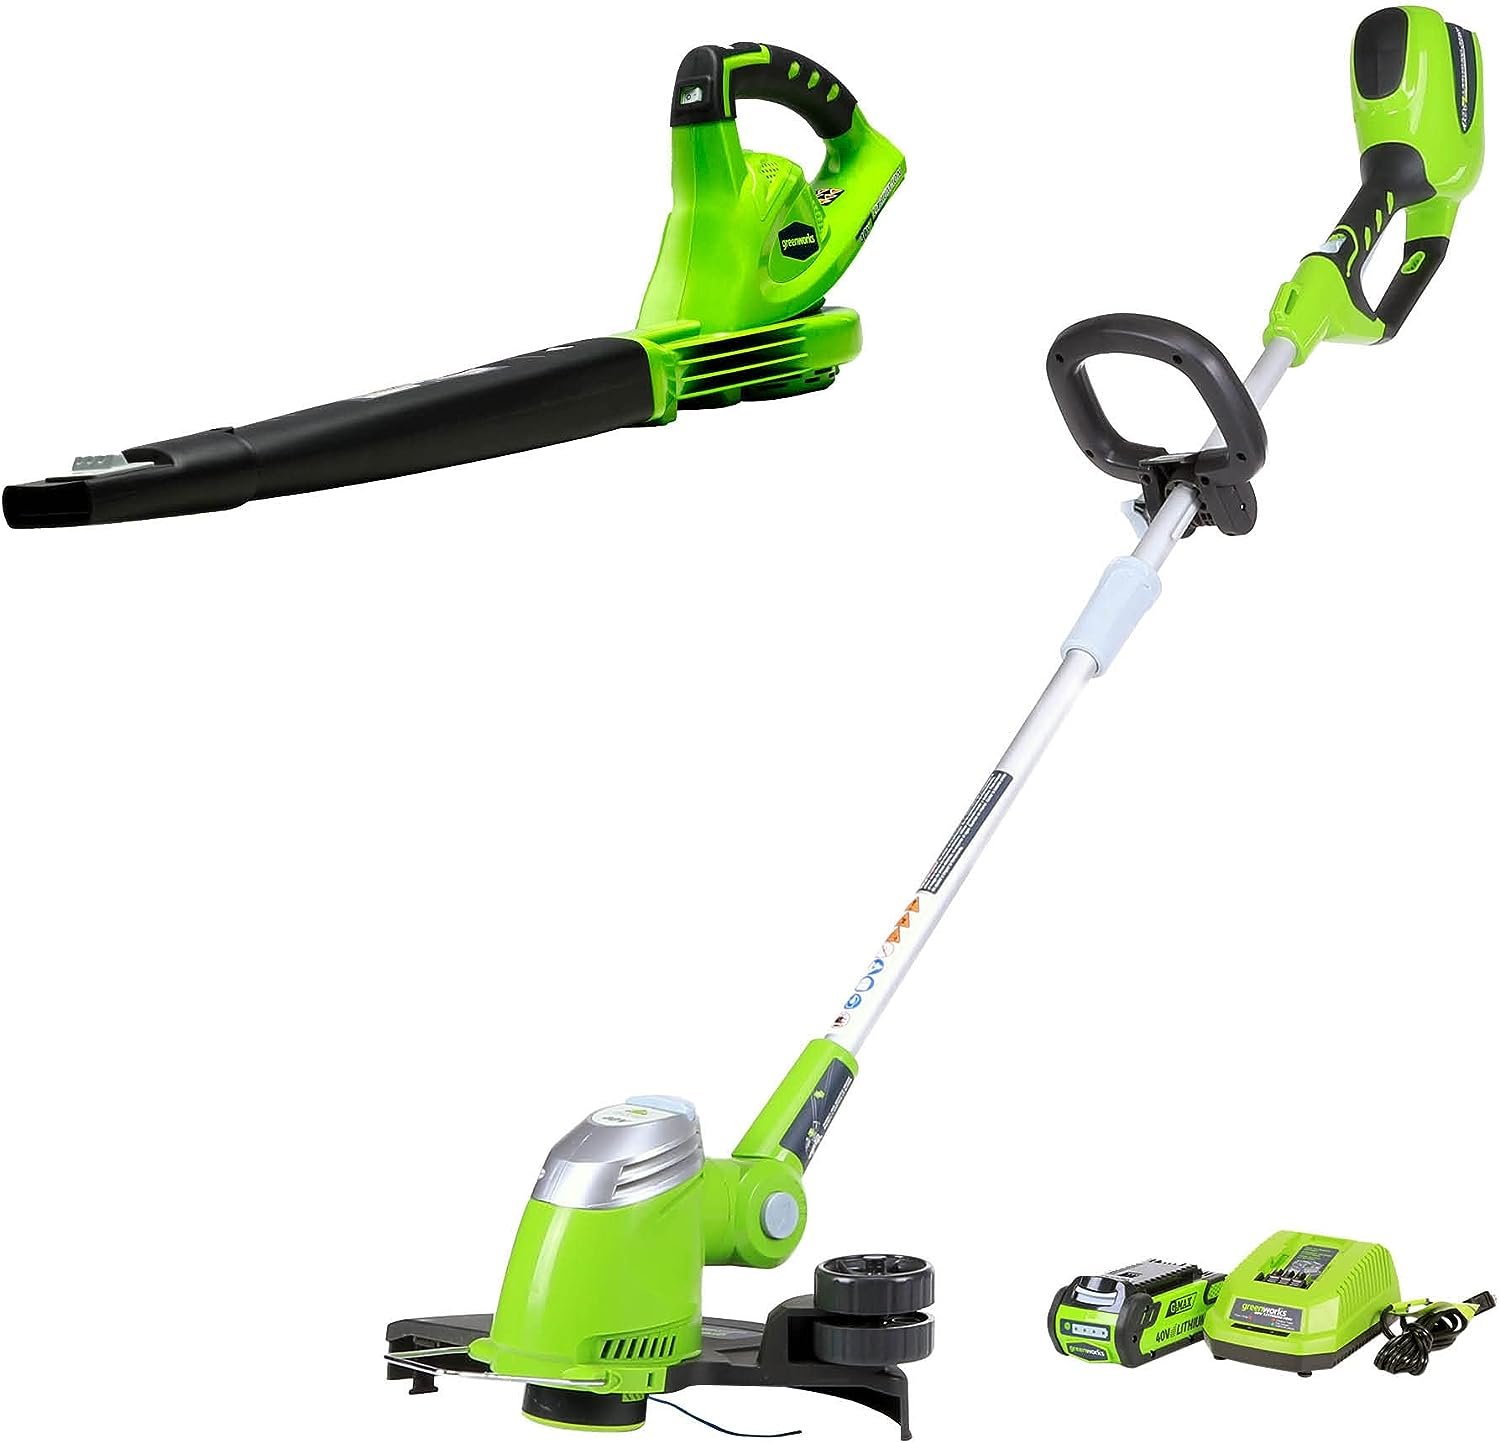 Greenworks 40V 13″ Cordless String Trimmer / Edger, Blower, 2.0Ah Battery and Charger Included review